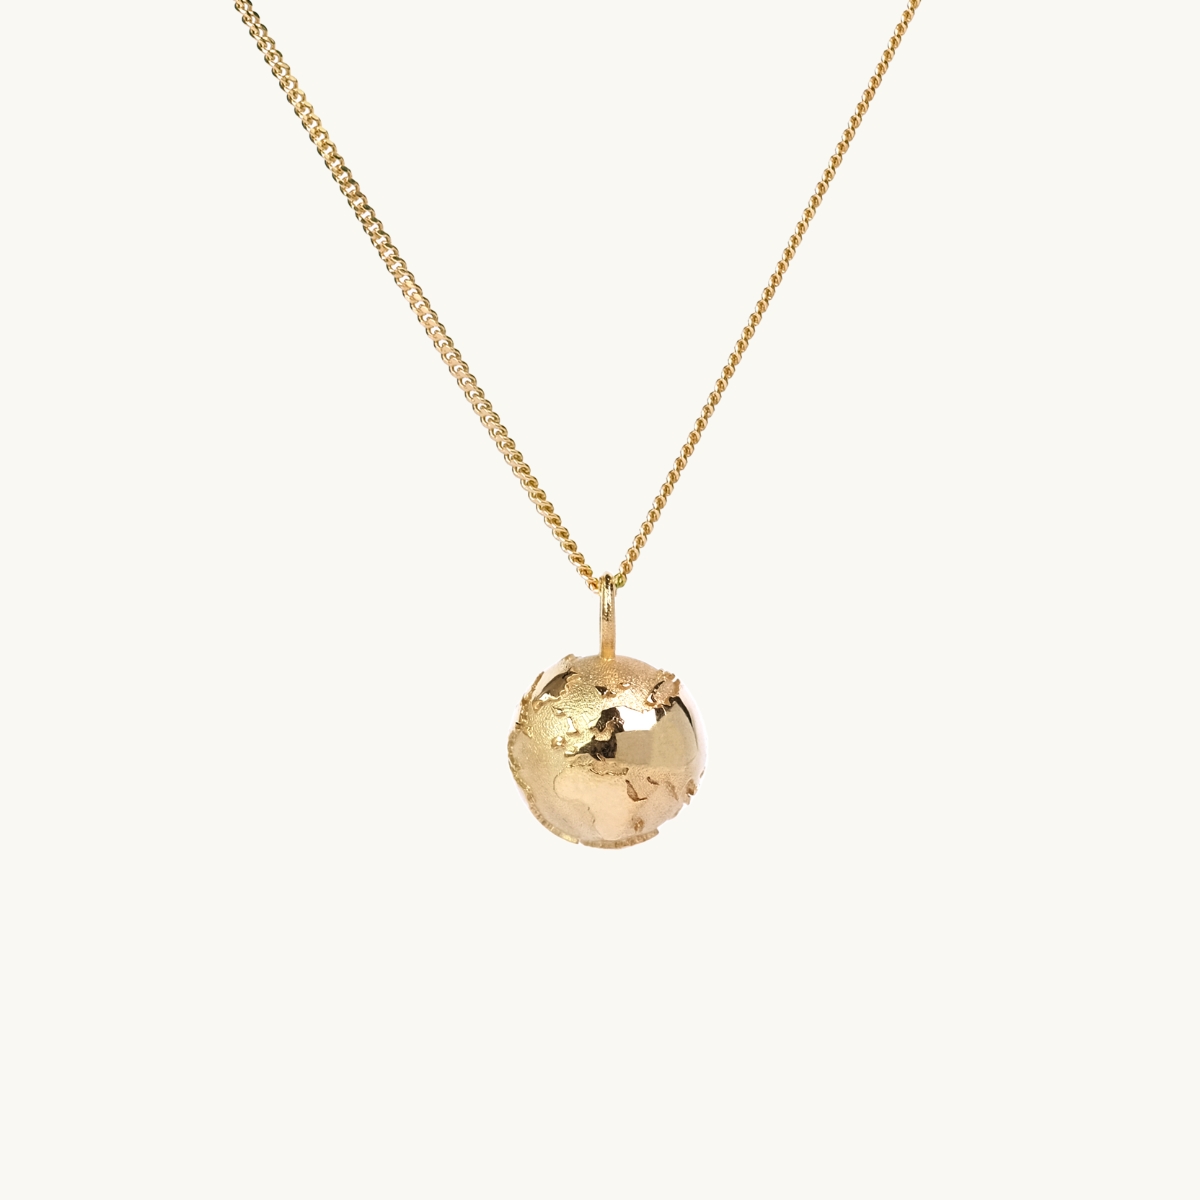 A necklace with a pendant in shape of the earth in gold